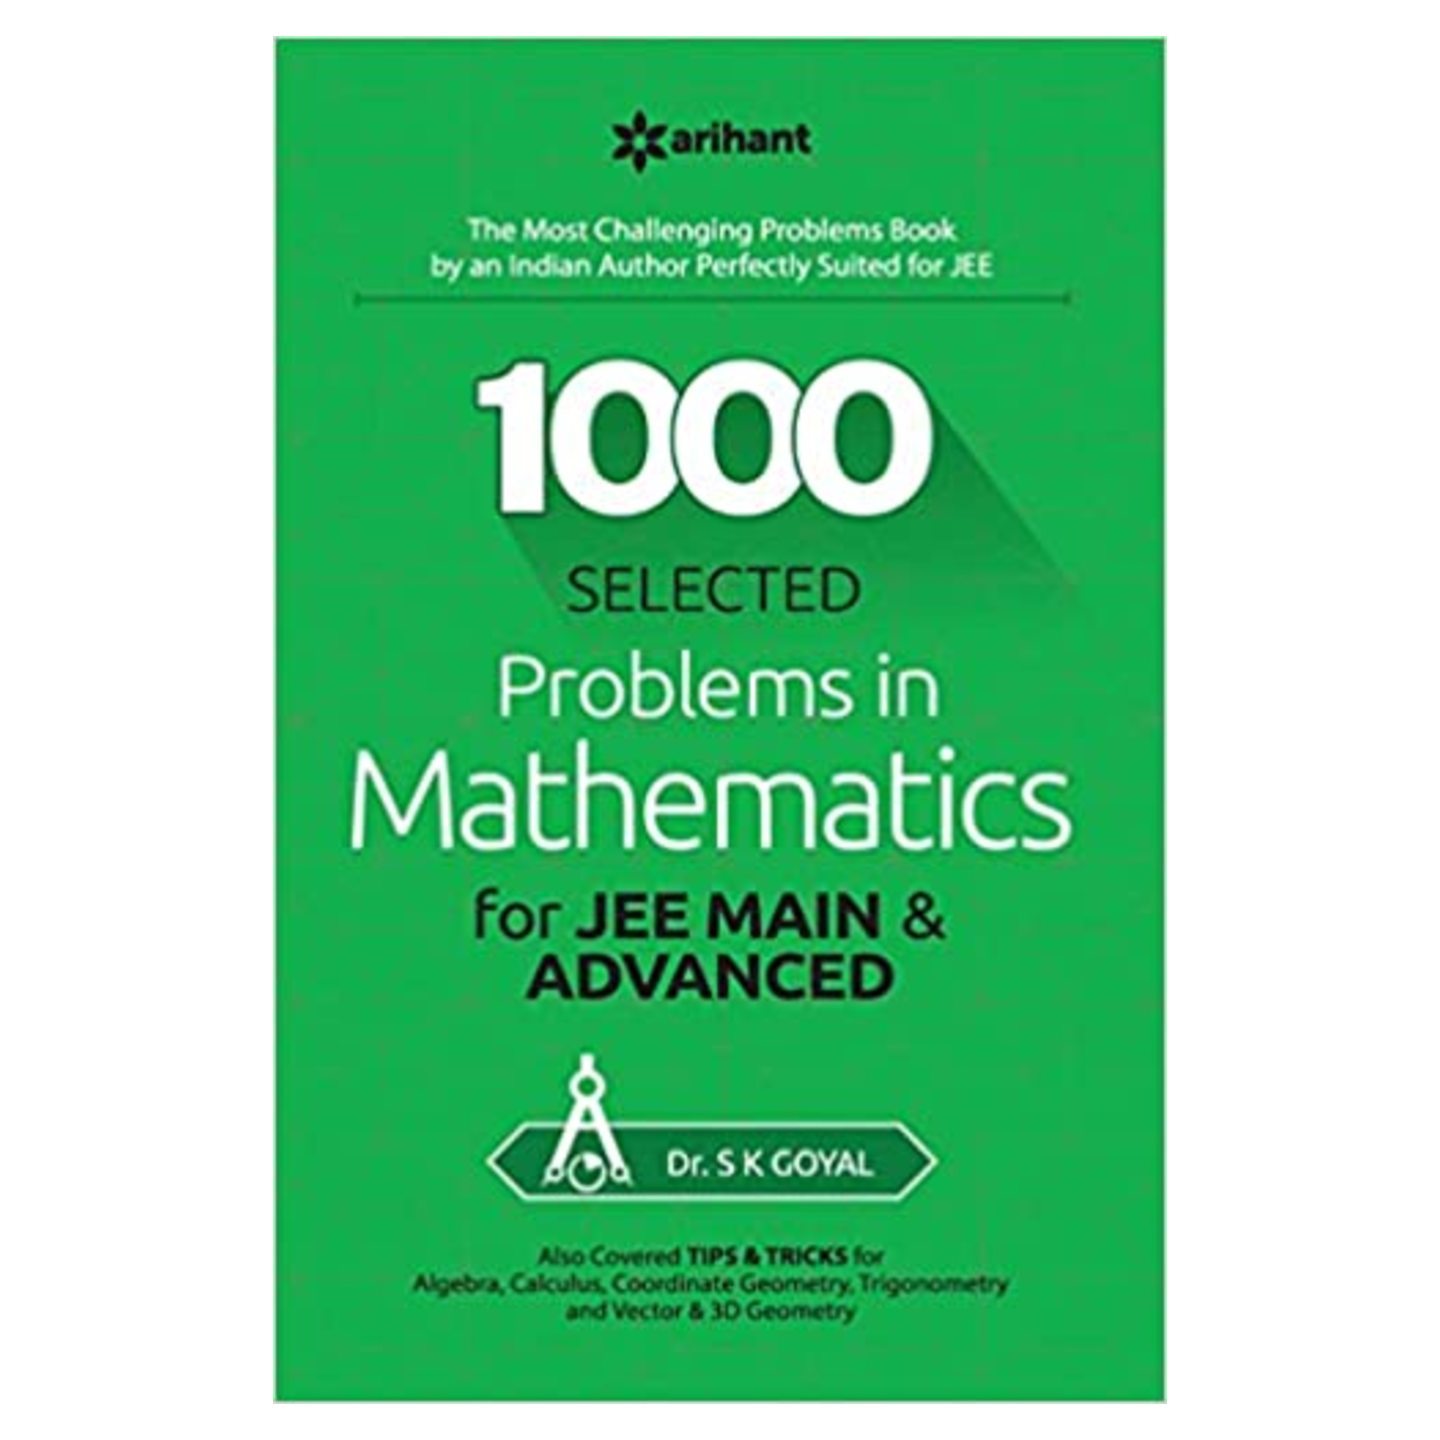 A Problem Book in Mathematics for IIT JEE SK GOYAL